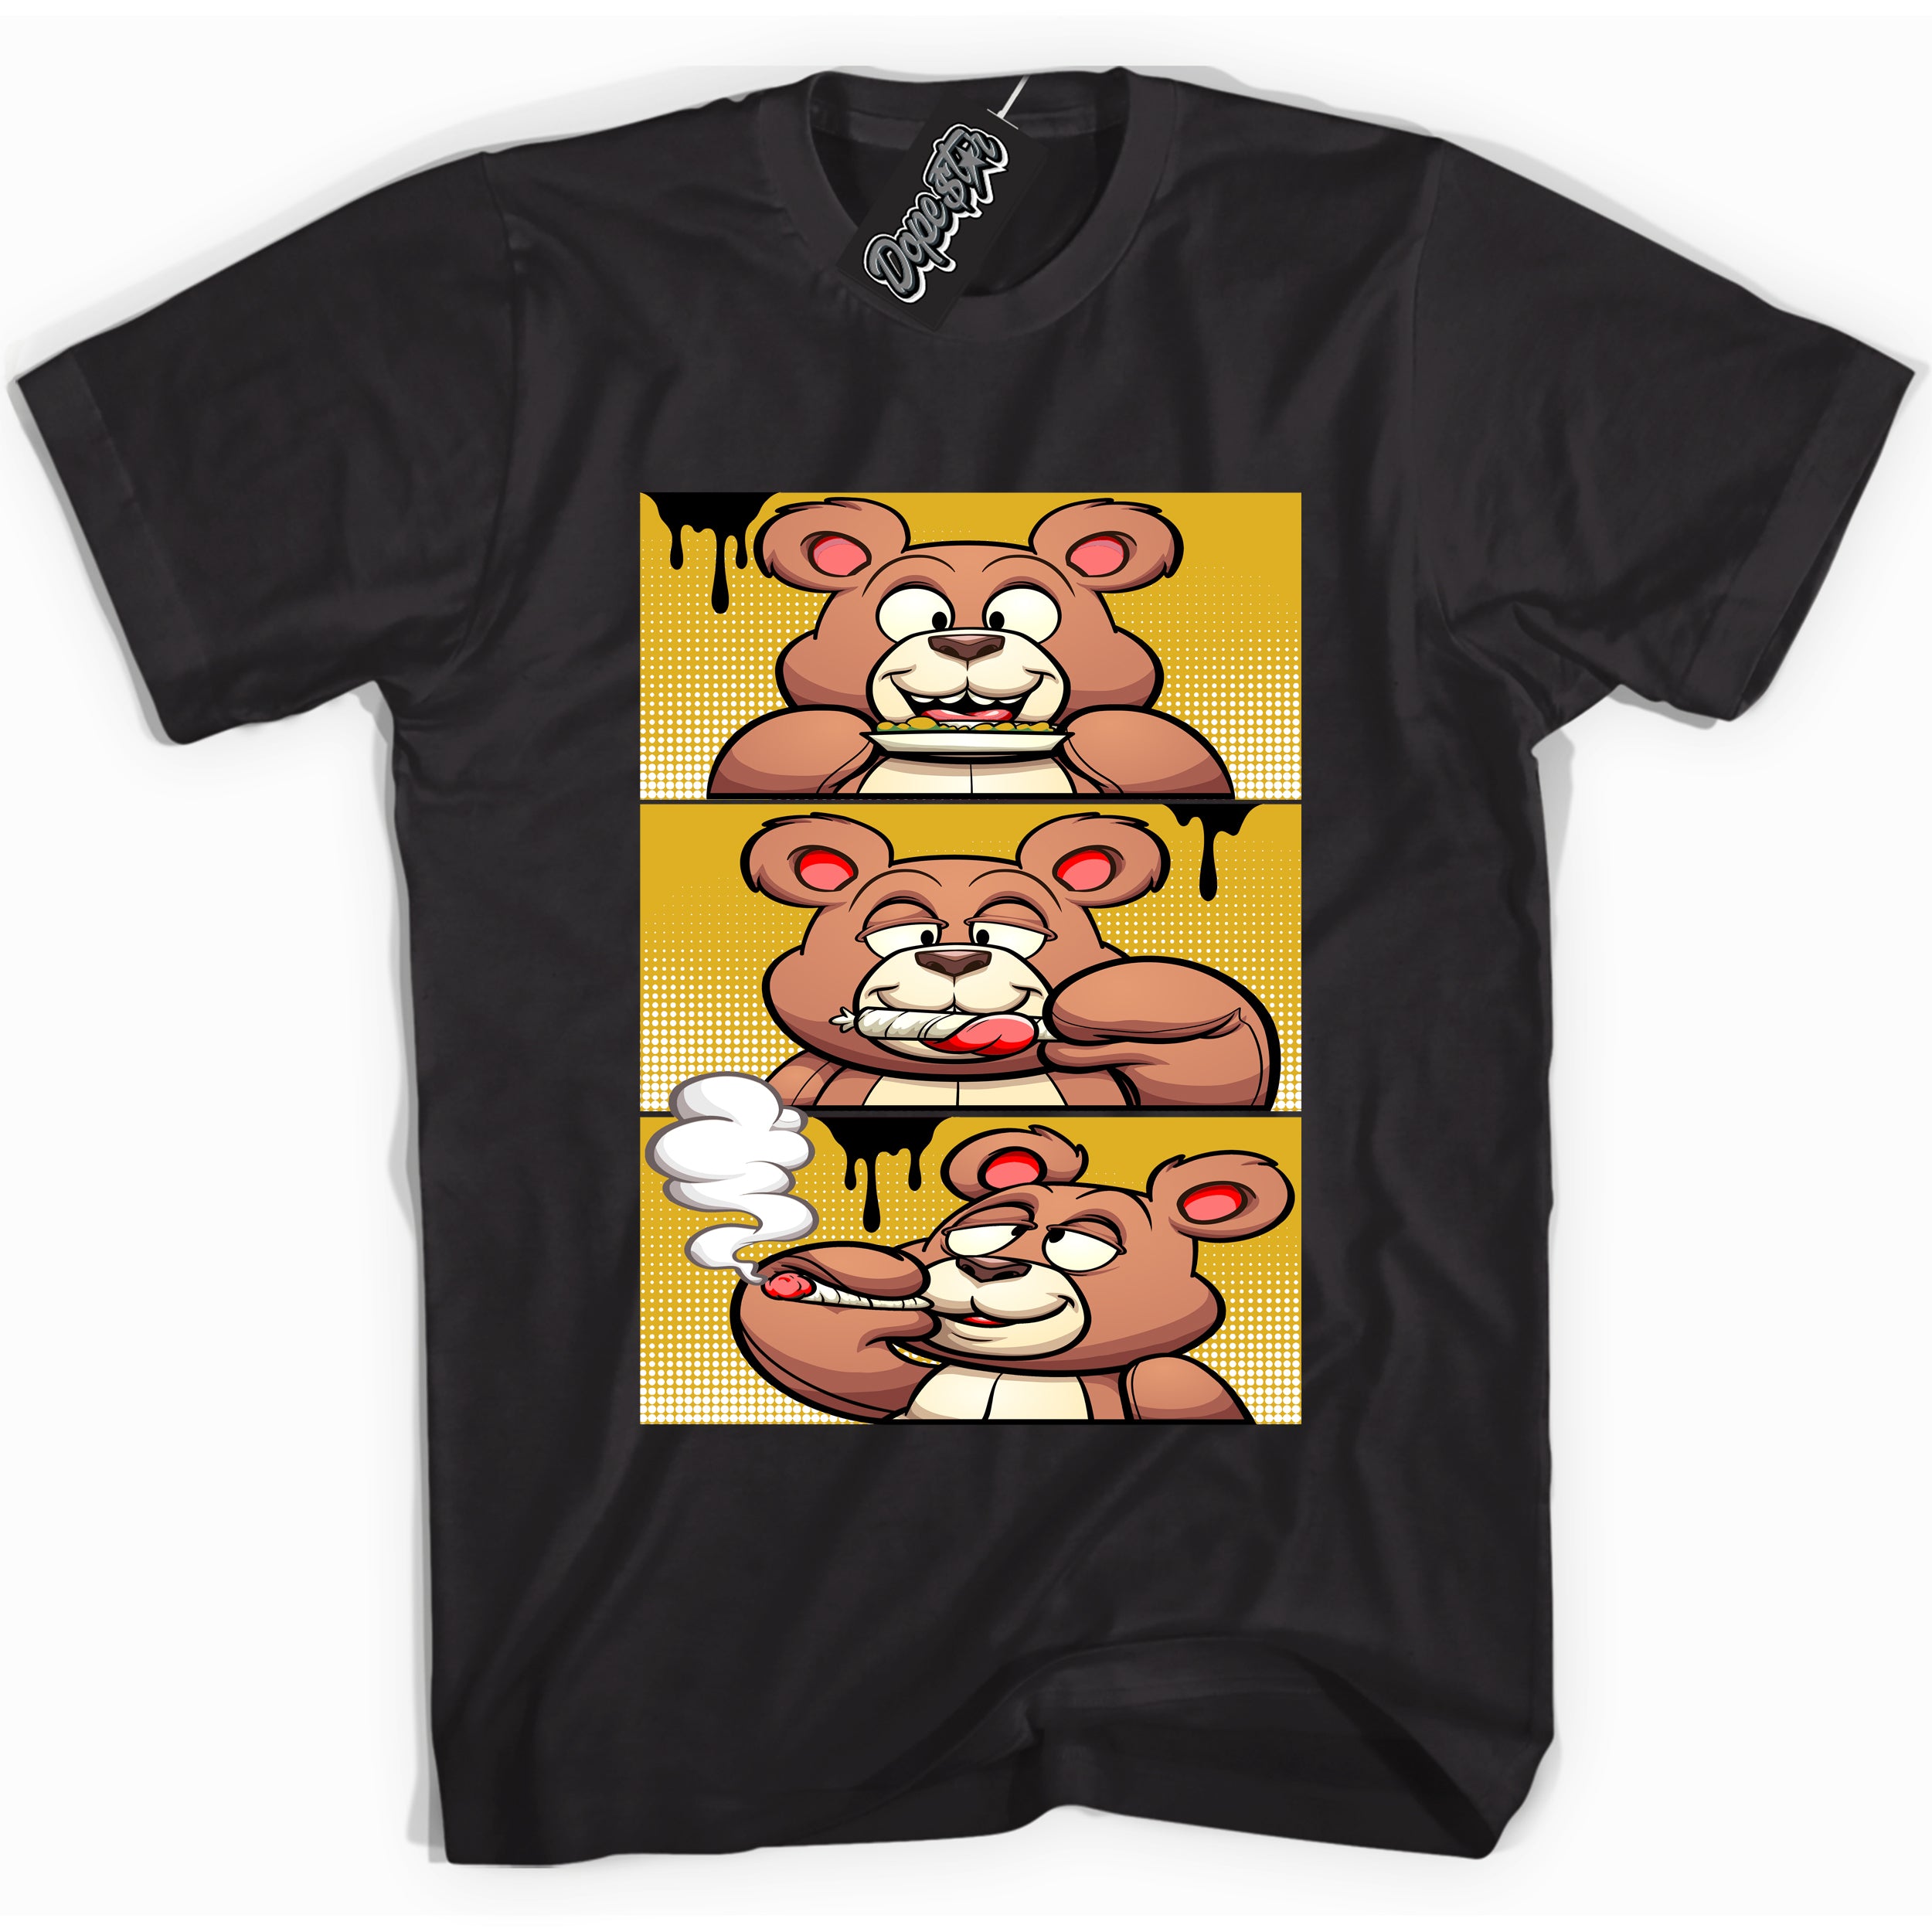 Cool Black Shirt with “ Roll It Lick It Smoke It Bear” design that perfectly matches Yellow Ochre 6s Sneakers.